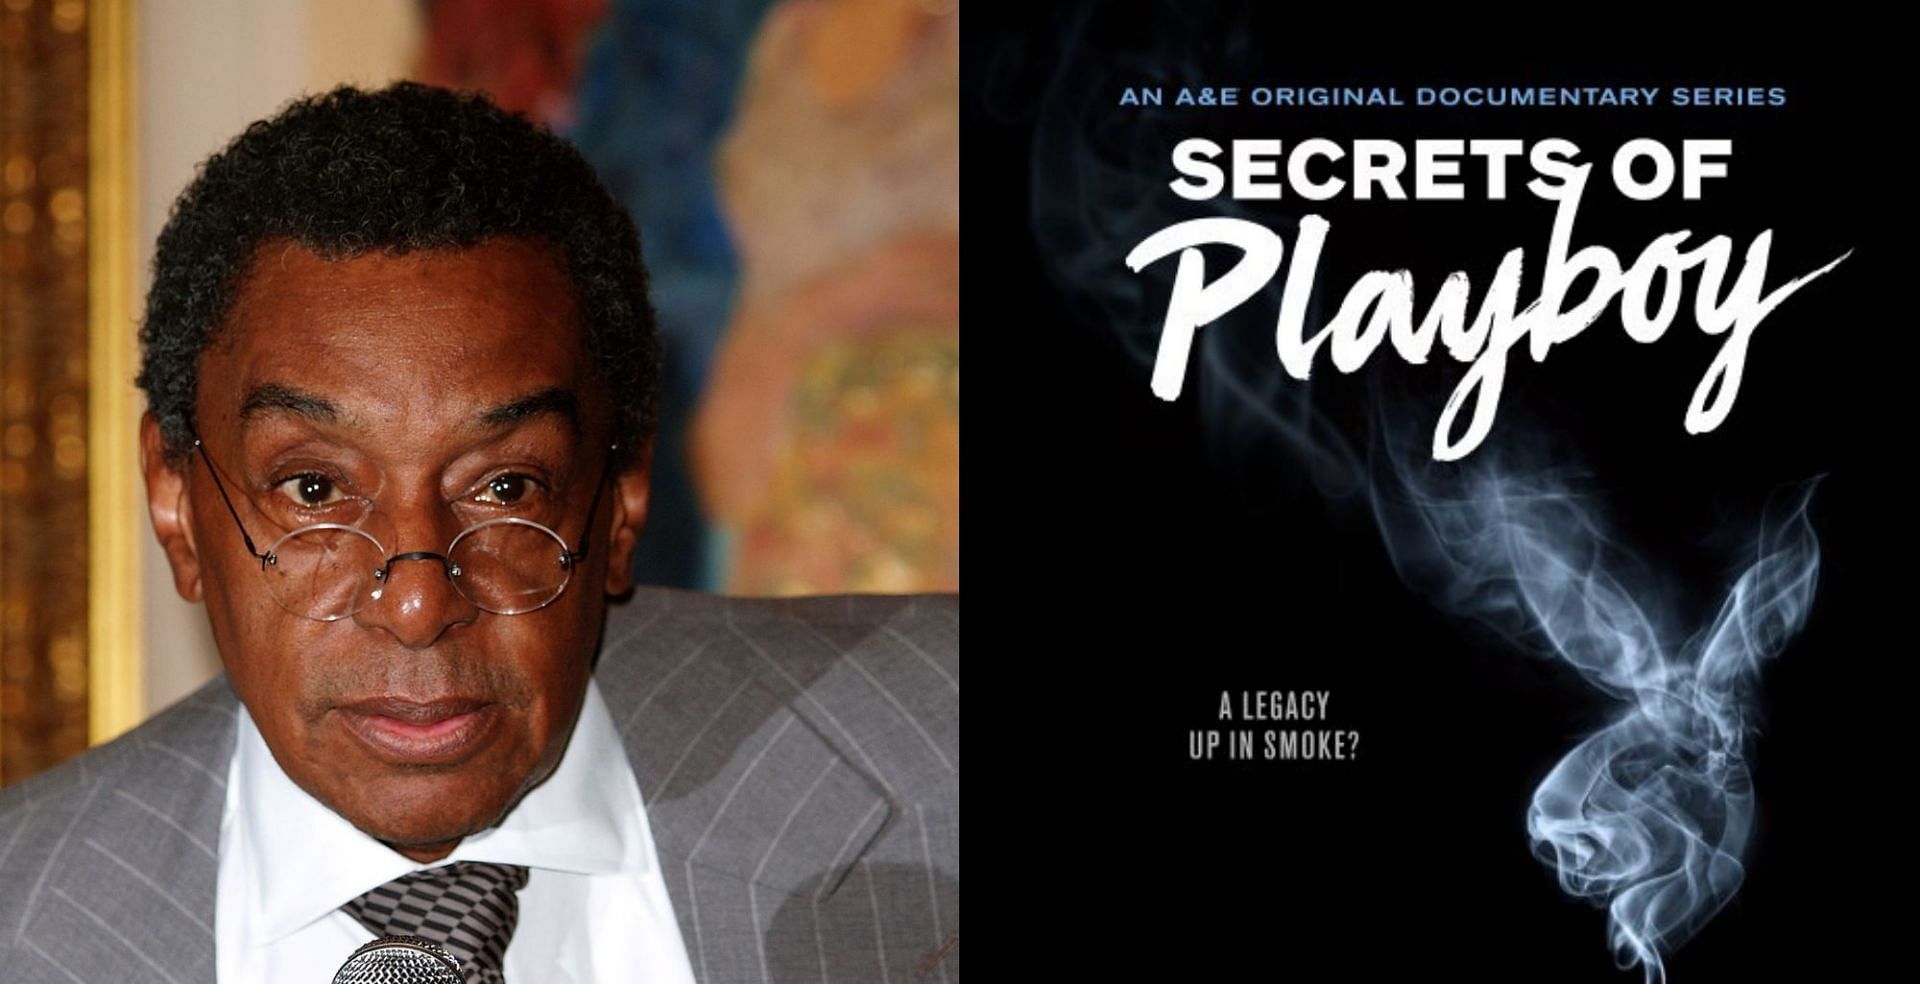 Don Cornelius has been accused of allegedly assaulting two young girls in the past on A&amp;E docuseries &#039;Secrets of Playboy&#039; (Image via Michael Tran/Getty Images and A&amp;E)